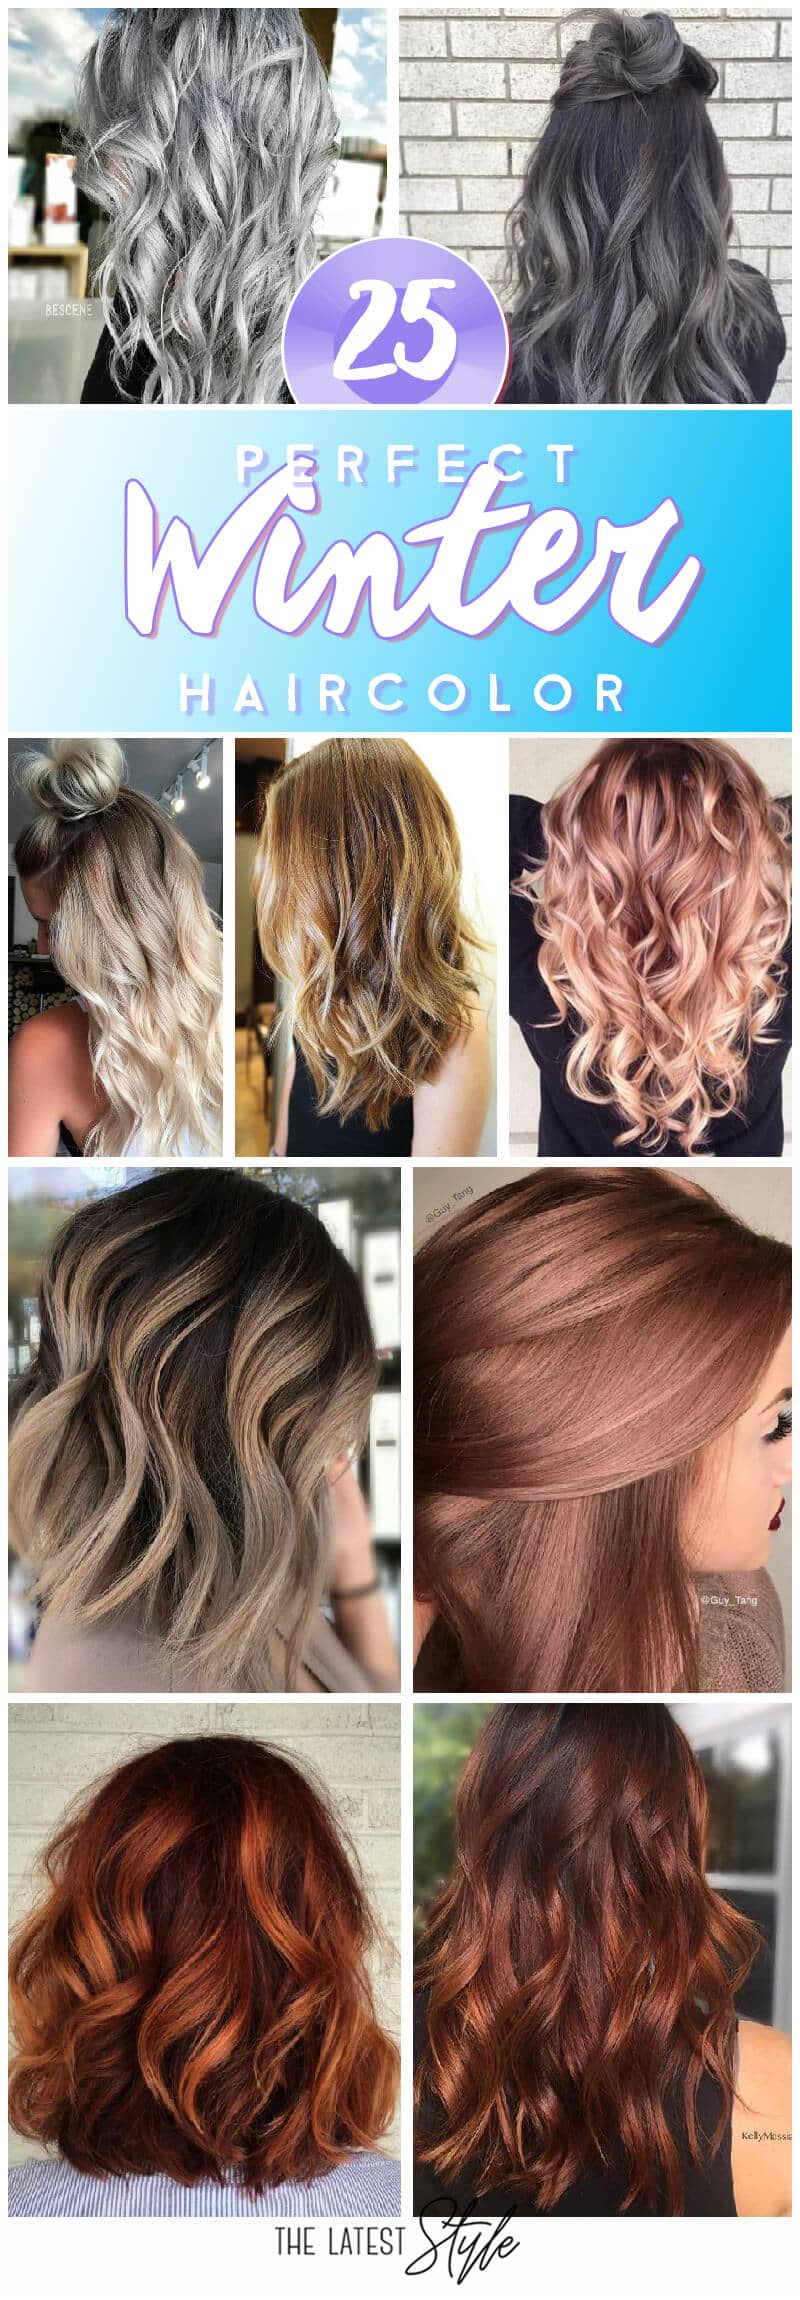 25 Hair Colors that are Perfect for Winter